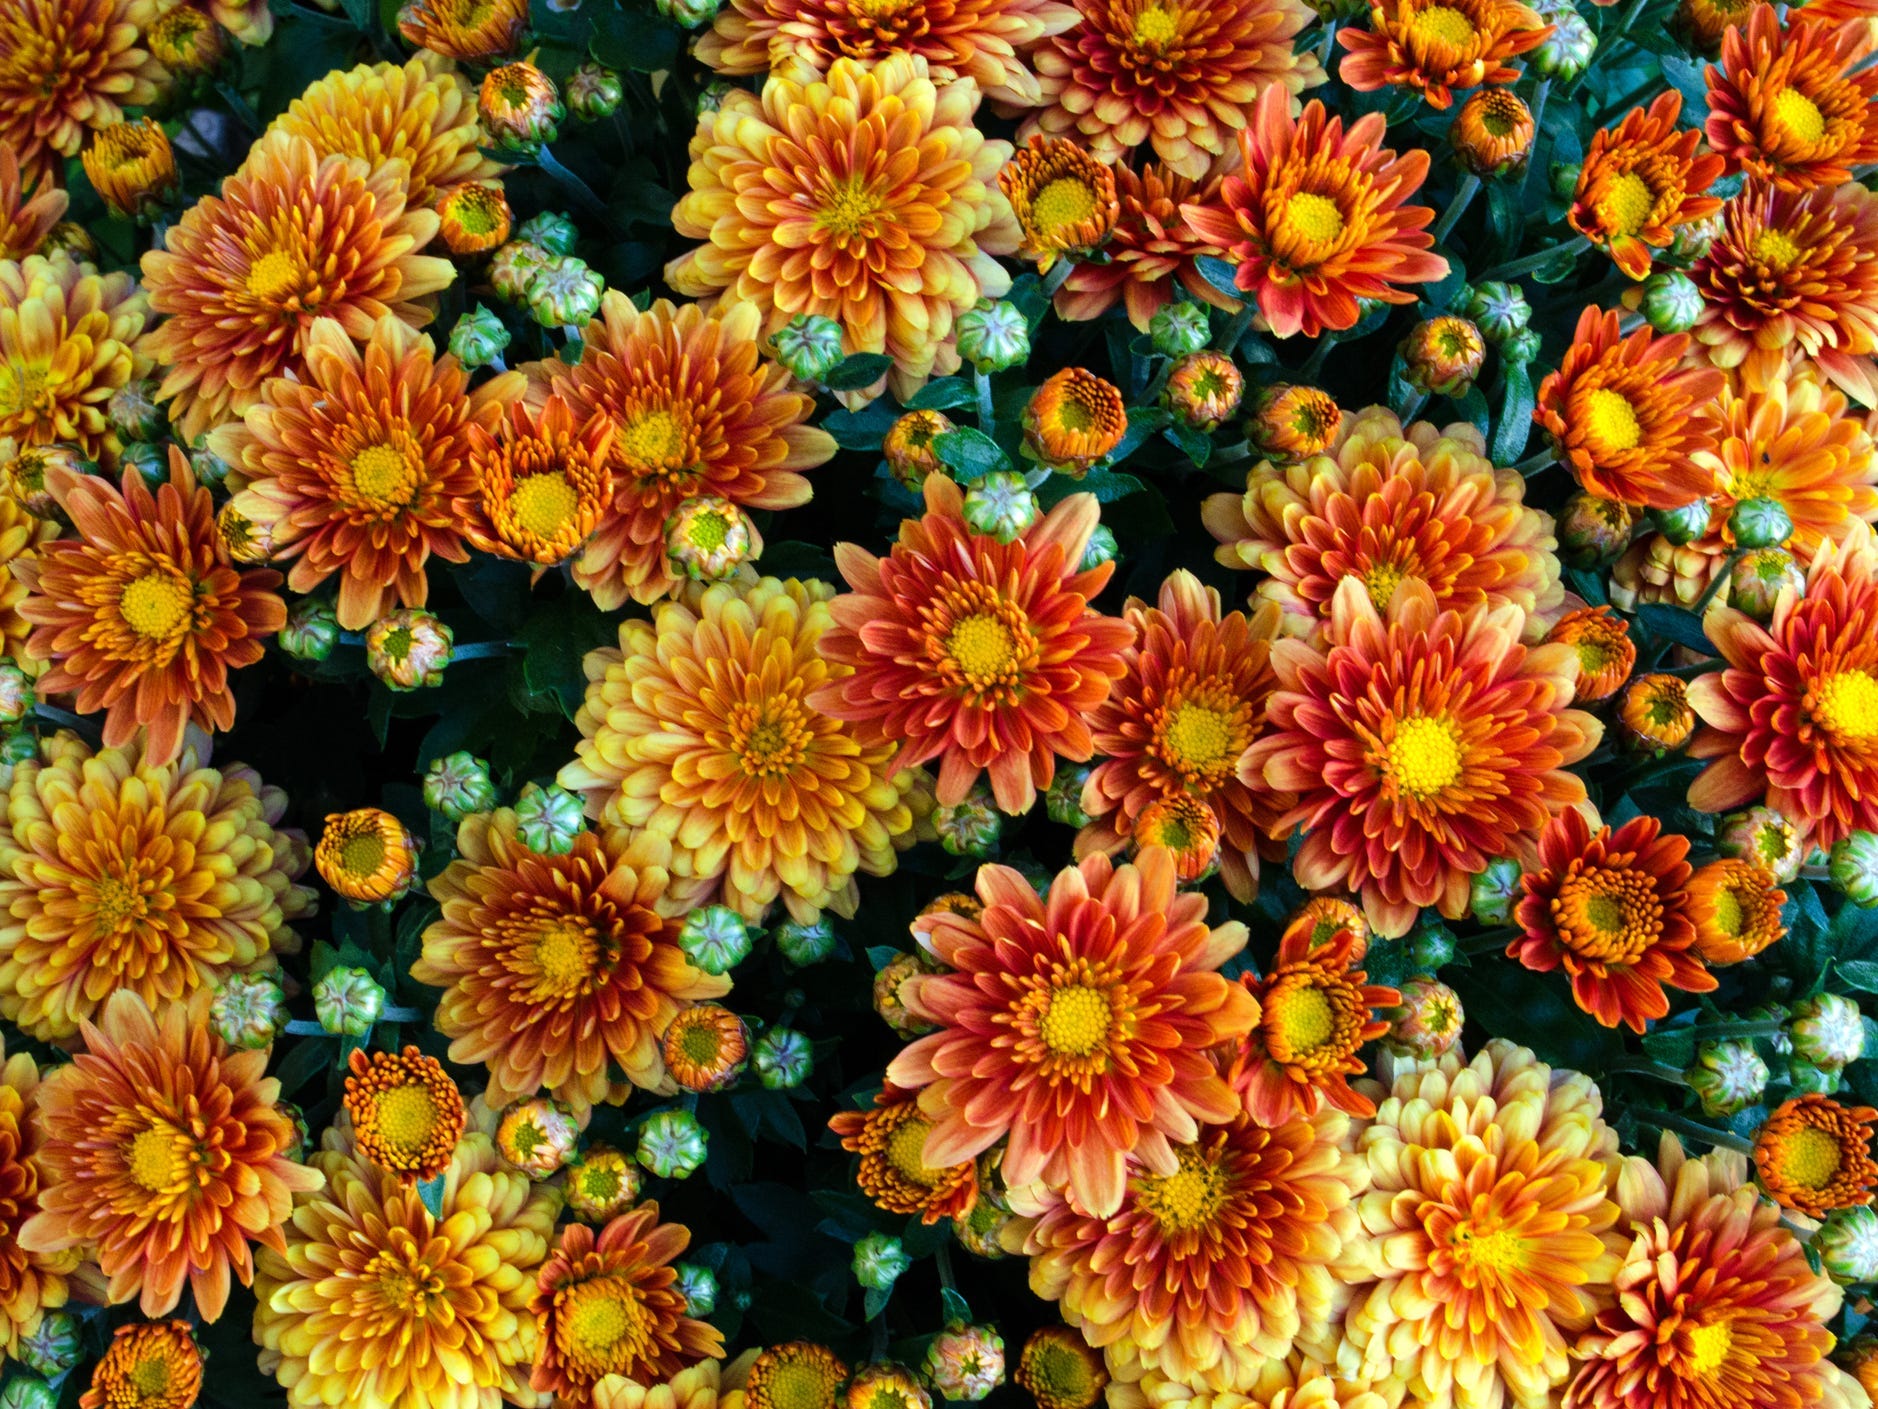 A bunch of yellow and orange chrysanthemums.